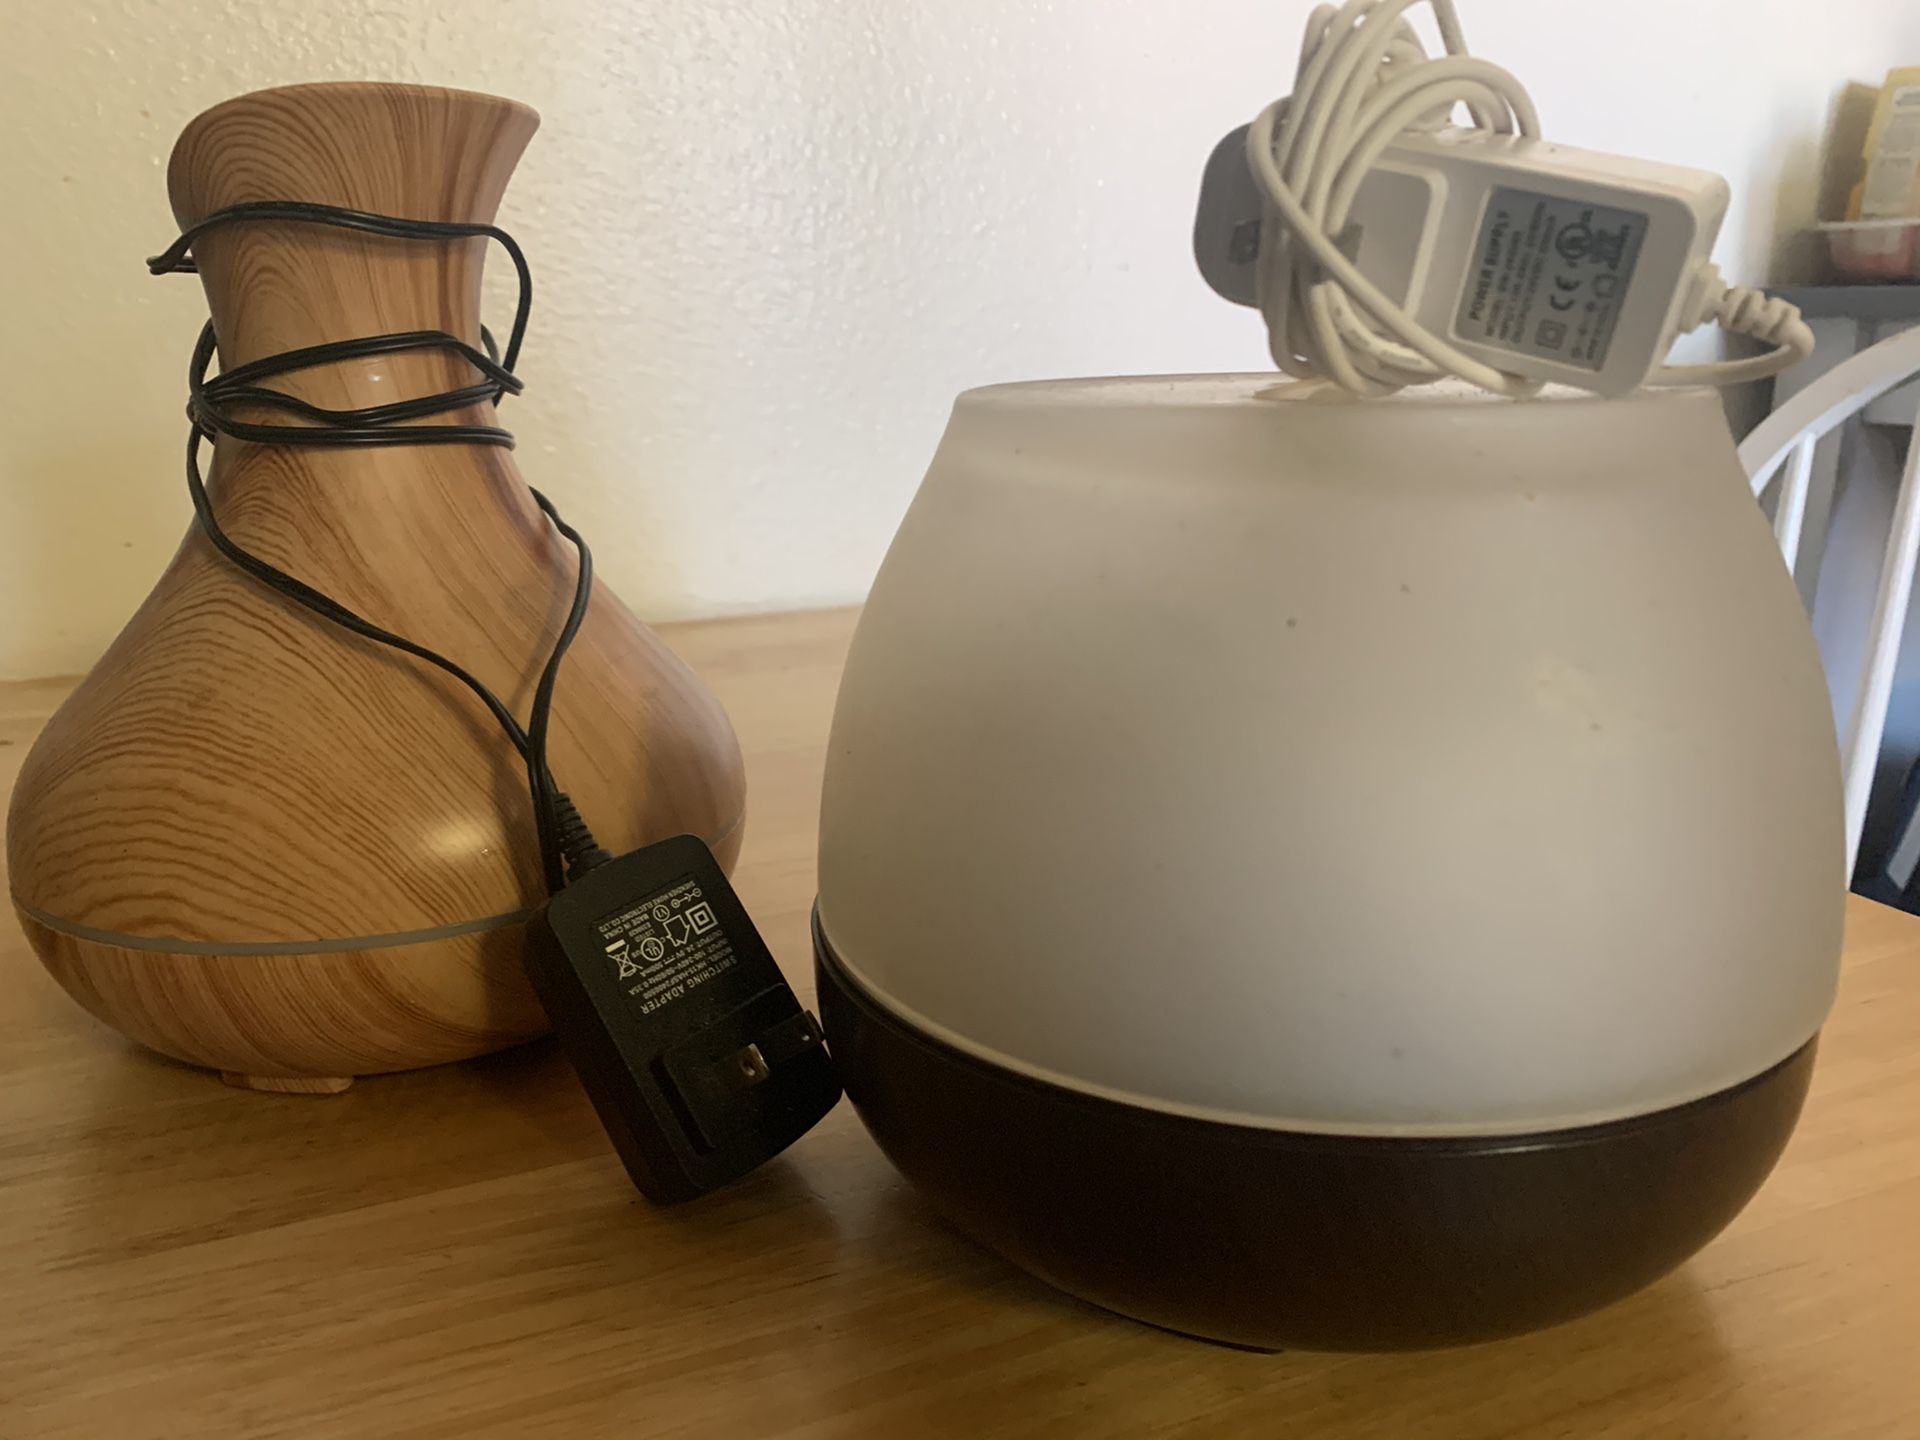 Two humidifiers